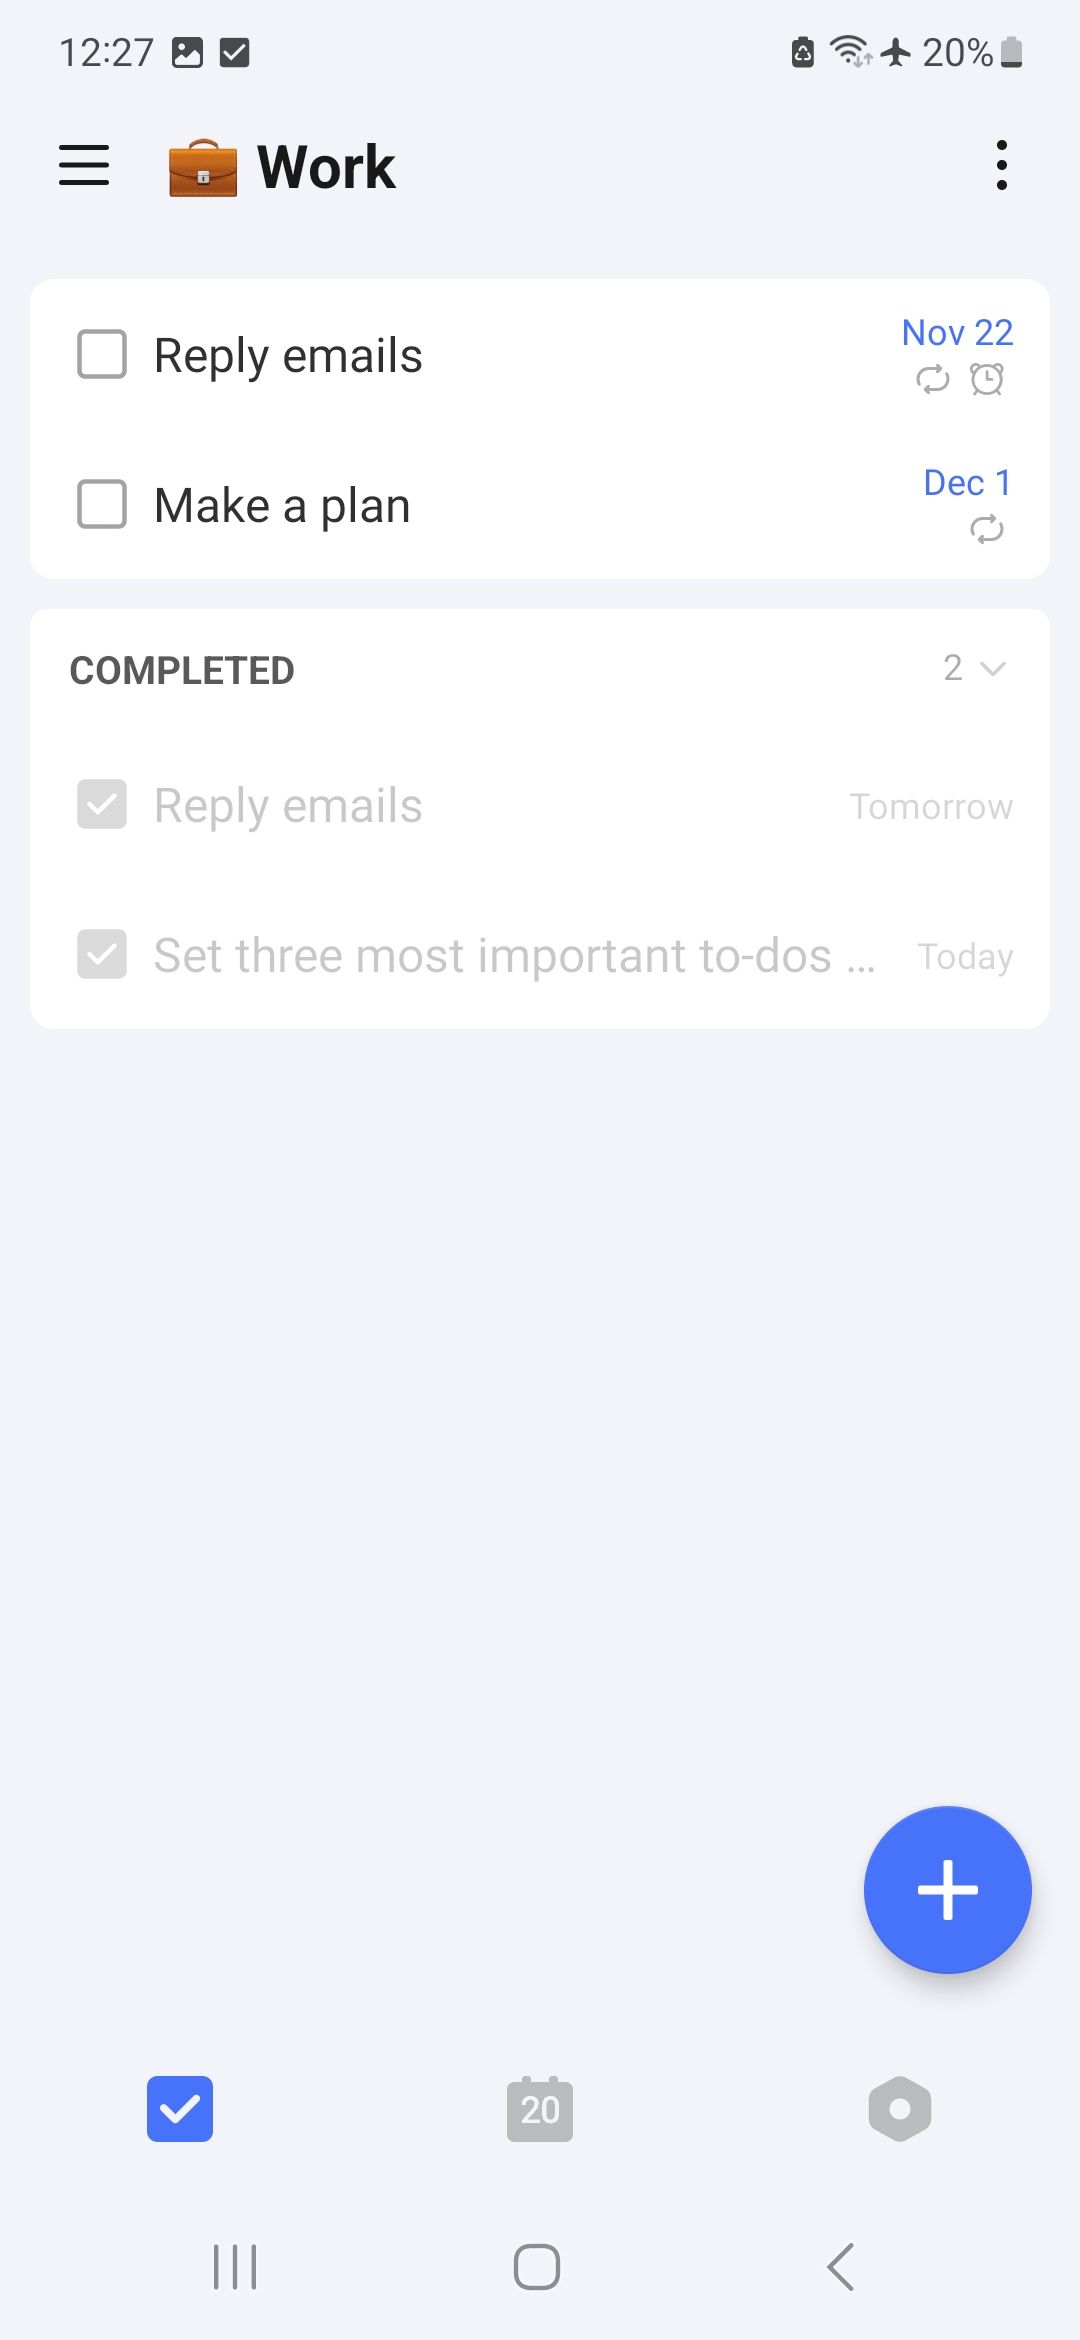 Screenshot of TickTick work-related to do list & completed